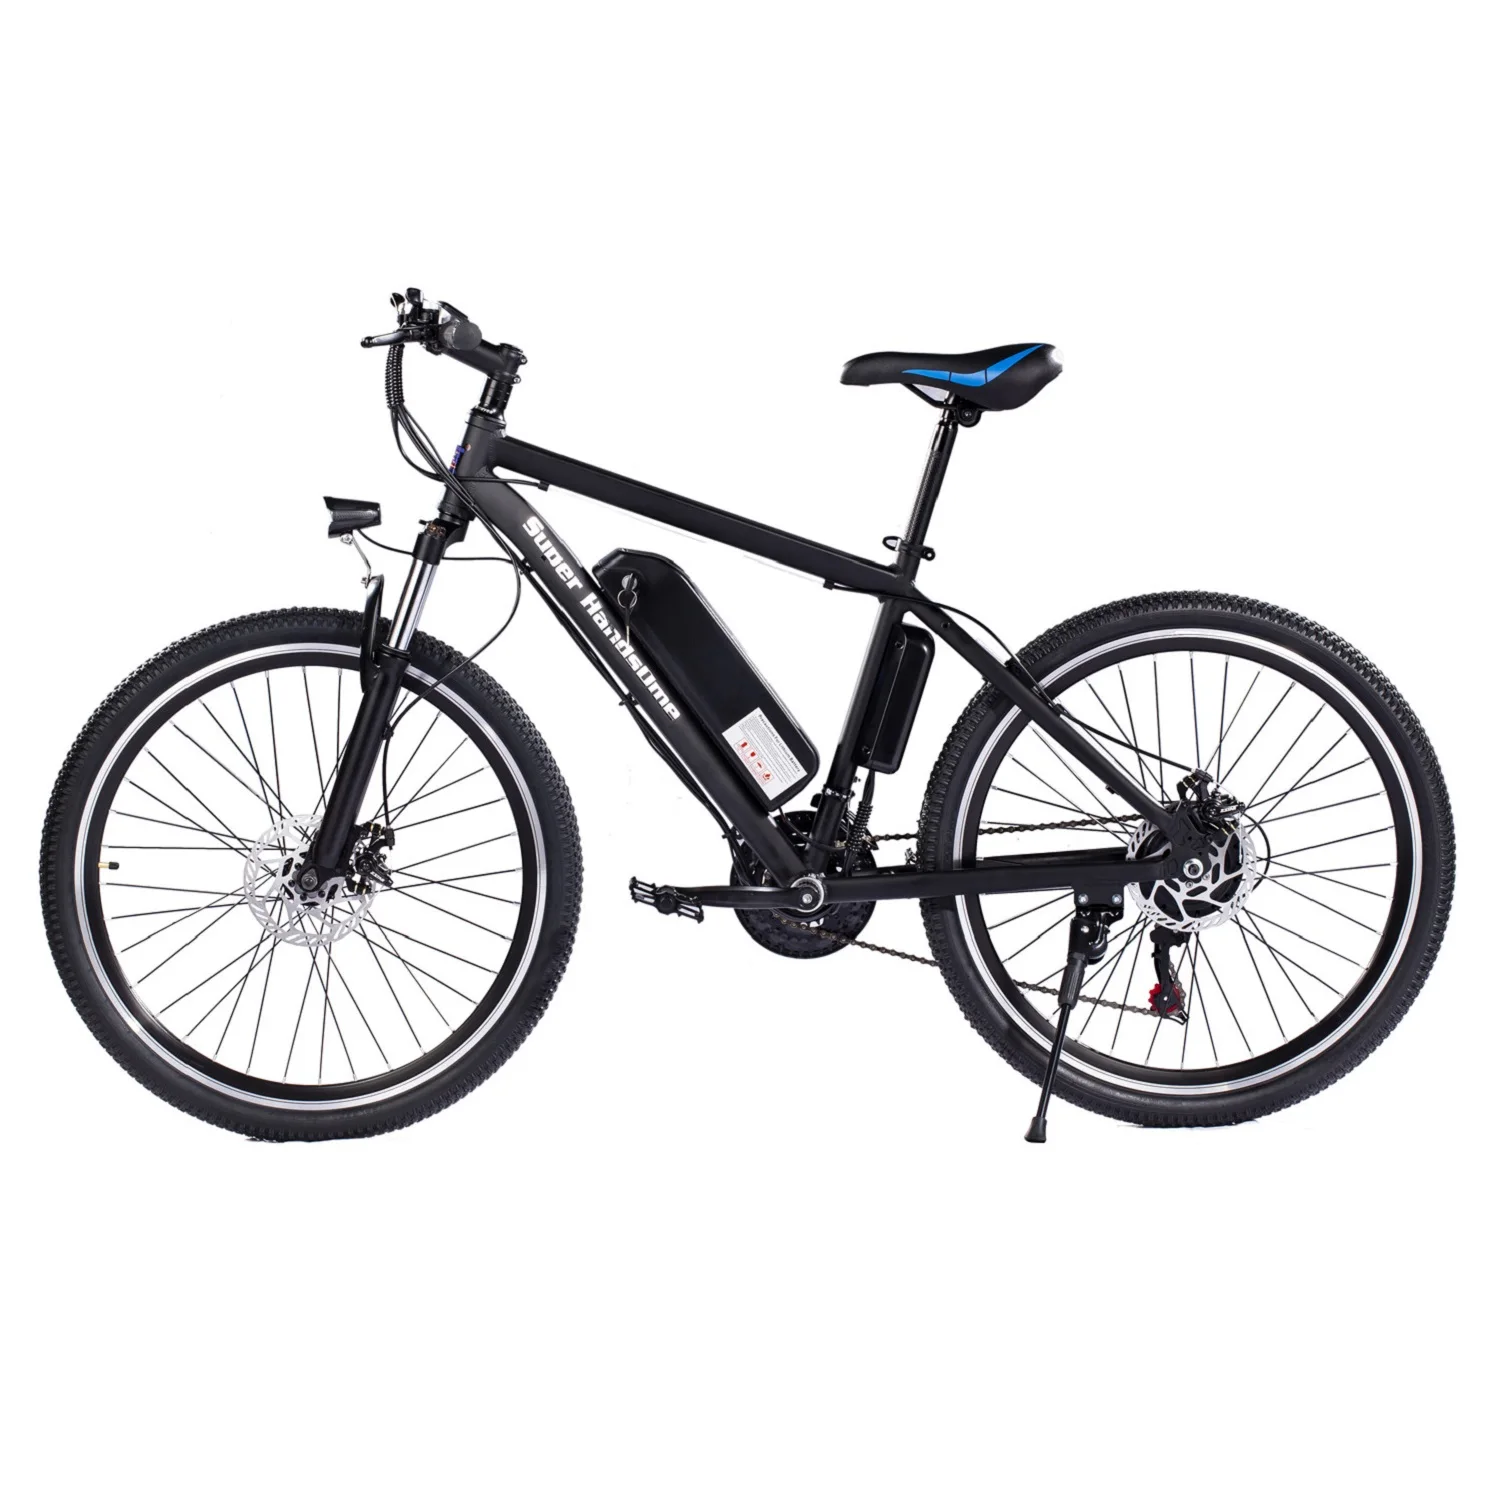 ANCHEER 26 Inch Wheel Electric Mountain Bike 250W With, 57% OFF